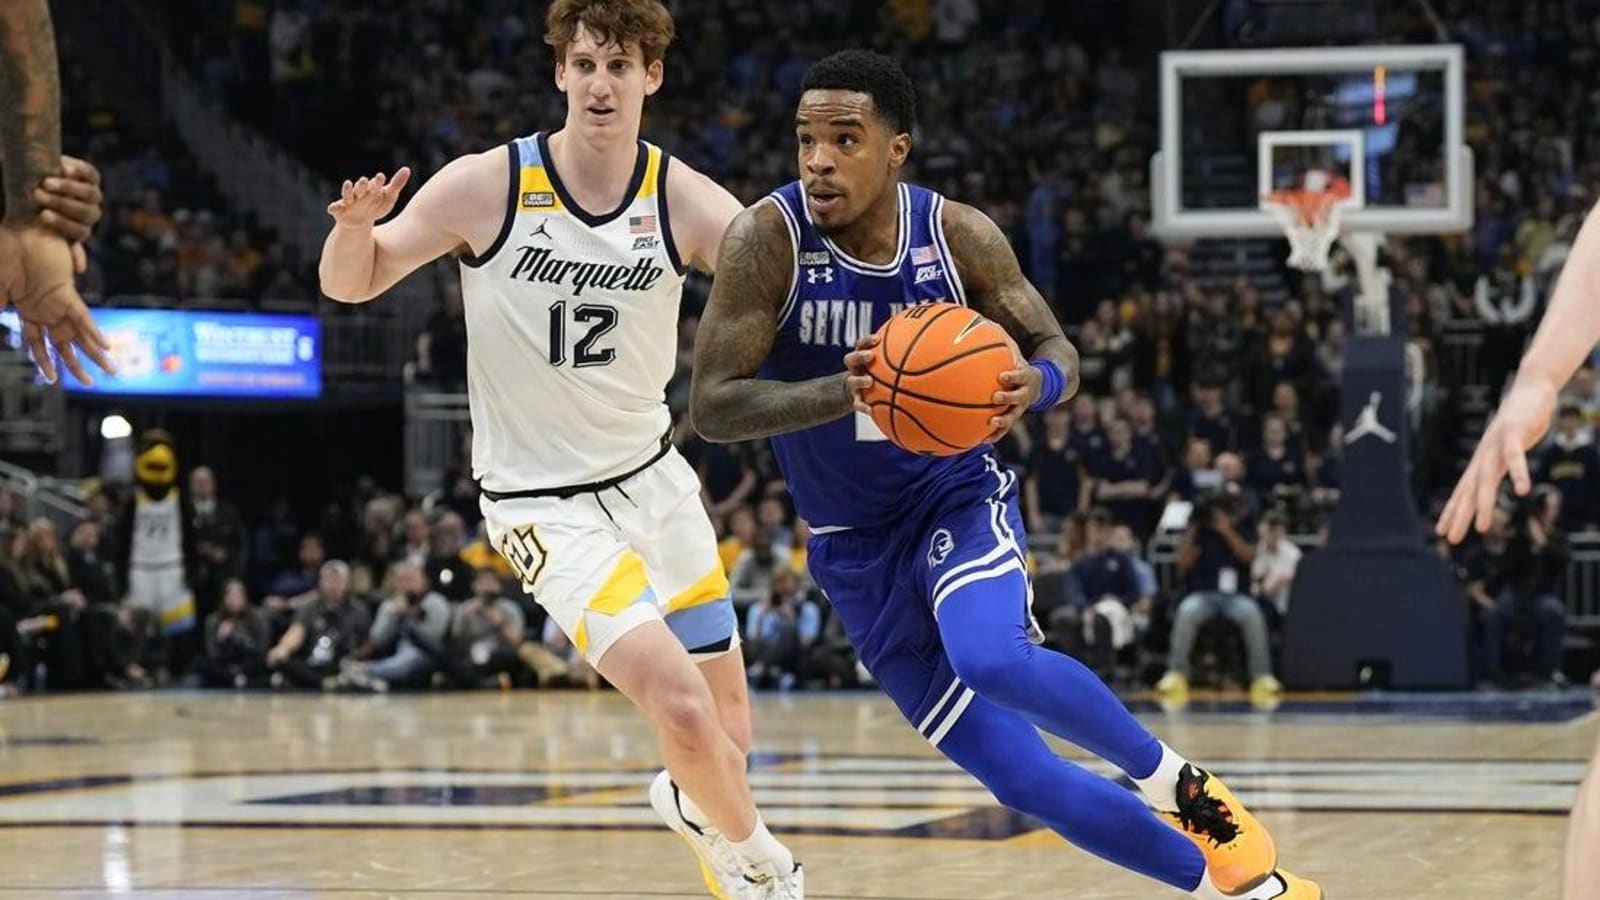 No. 14 Marquette puts Seton Hall away with dominant second half